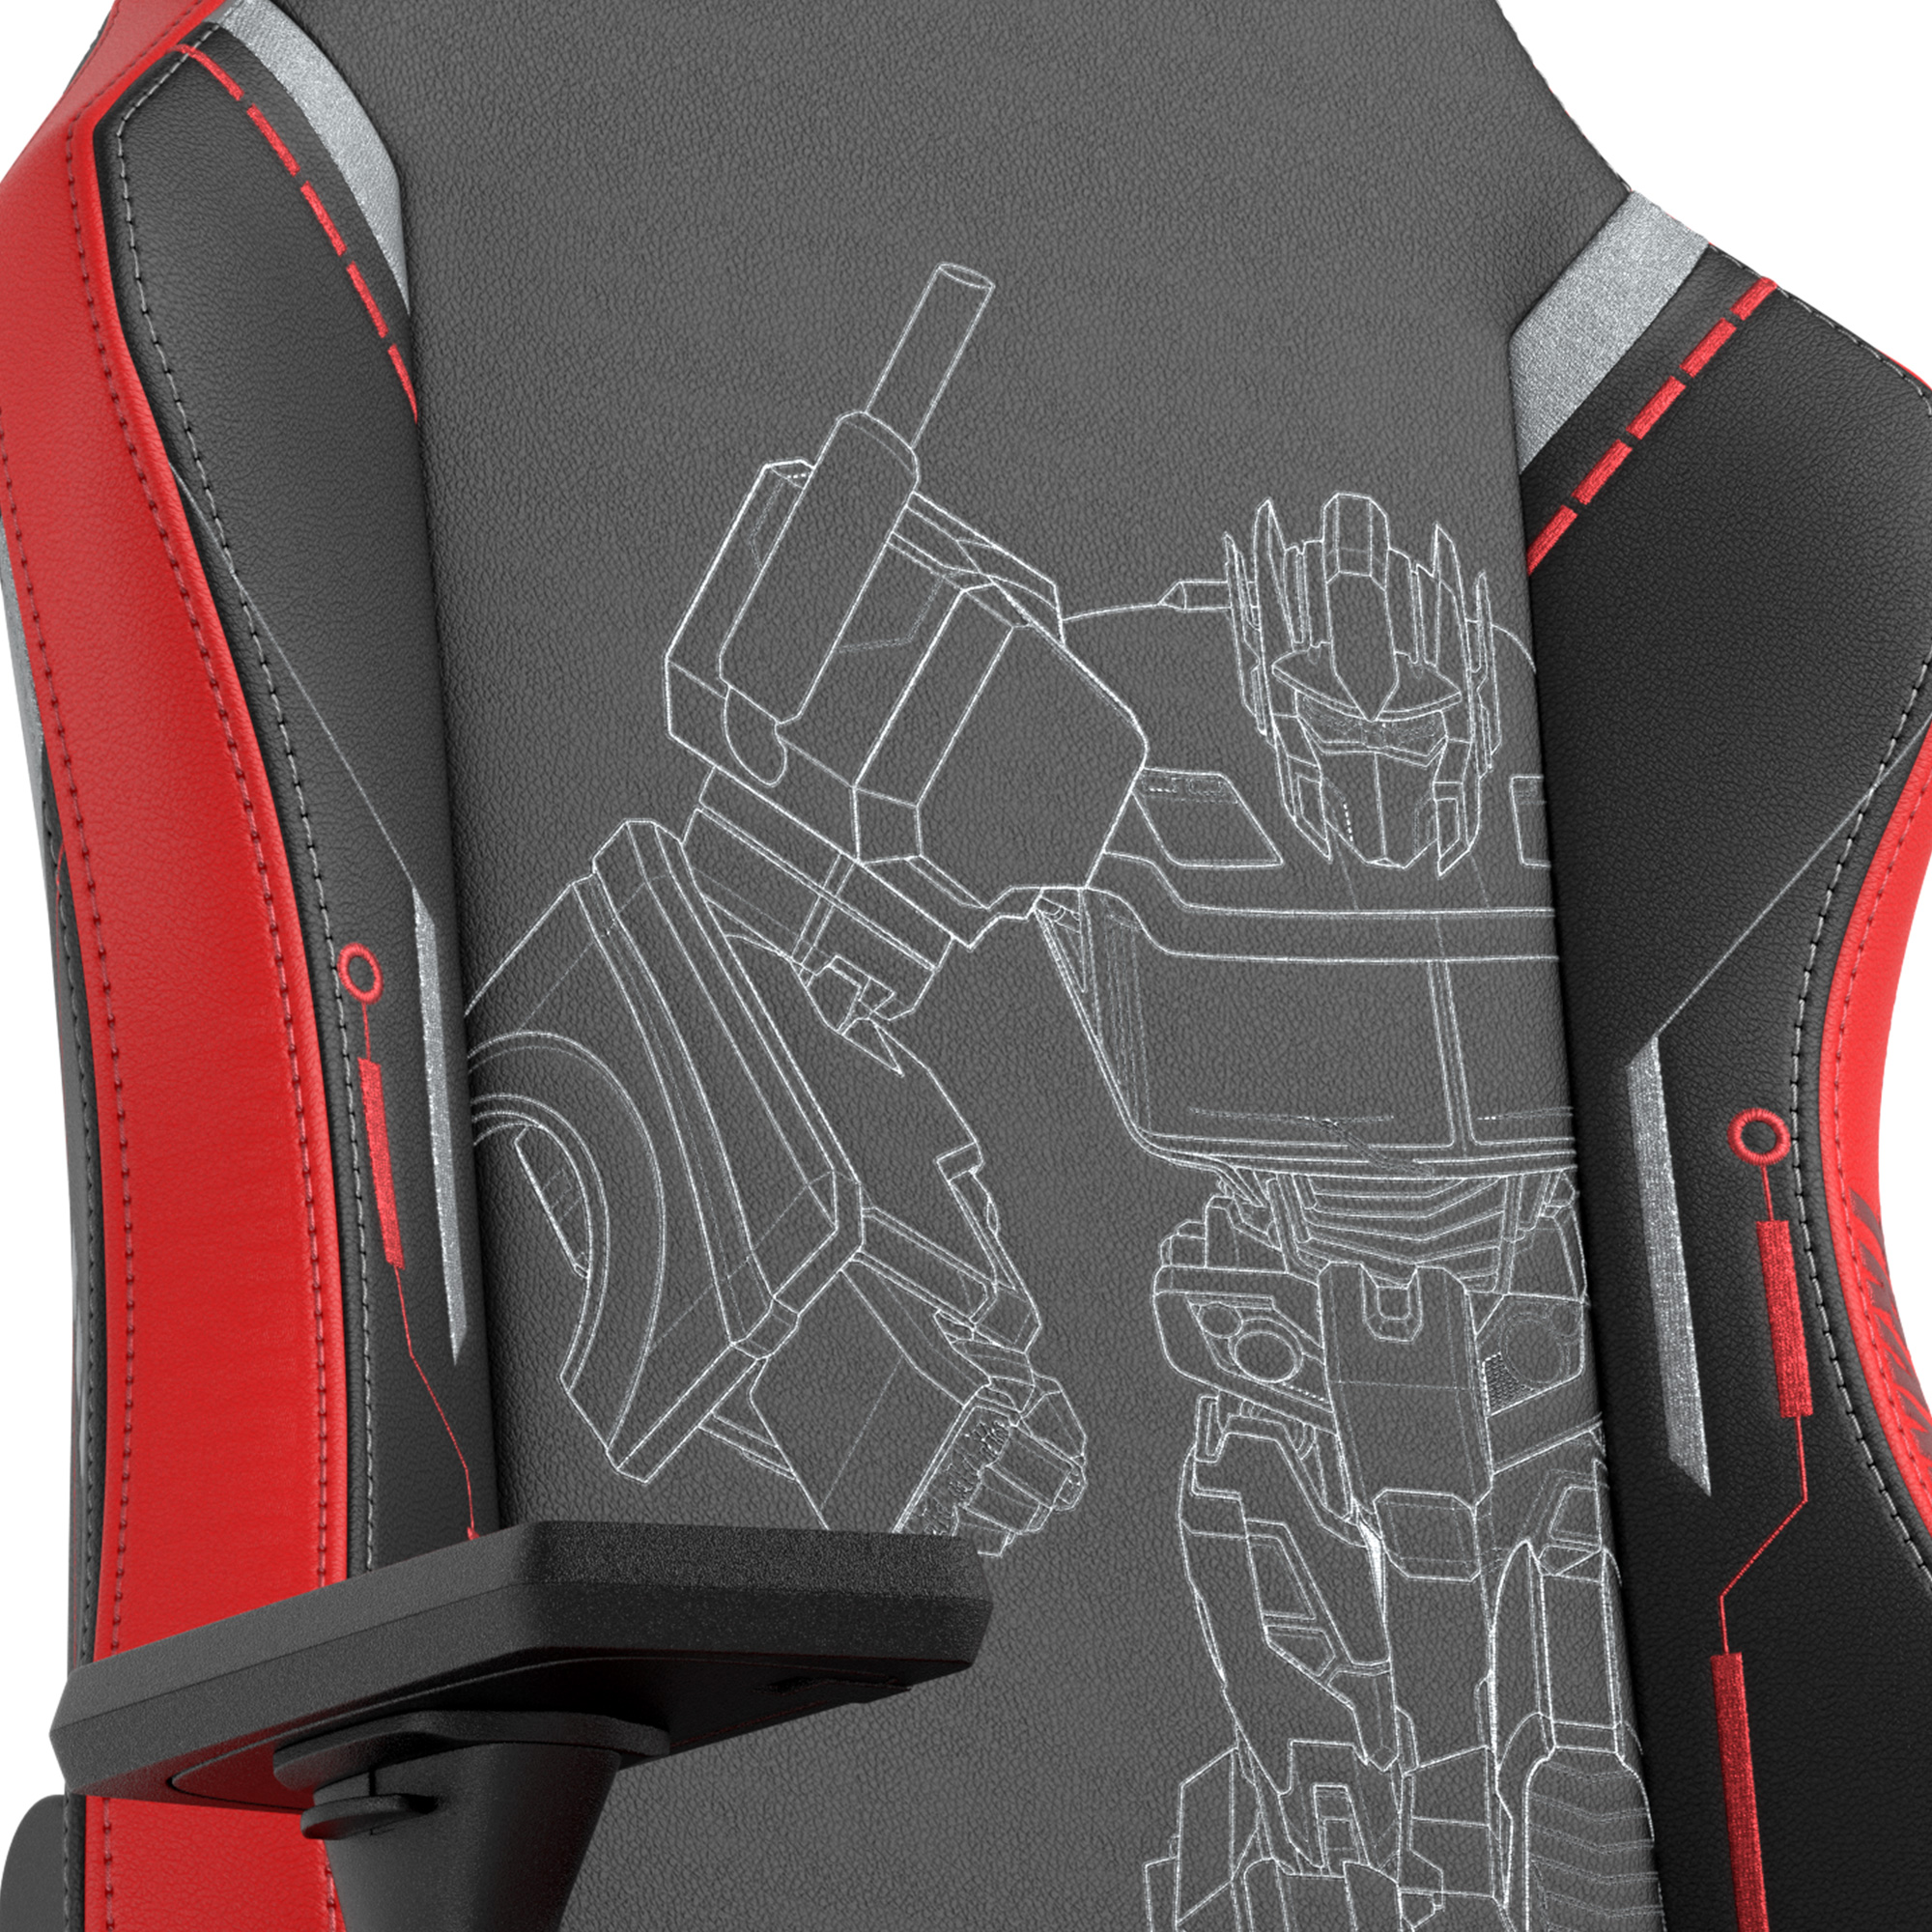 X1000 Gaming Chair Transformers Autobots Edition